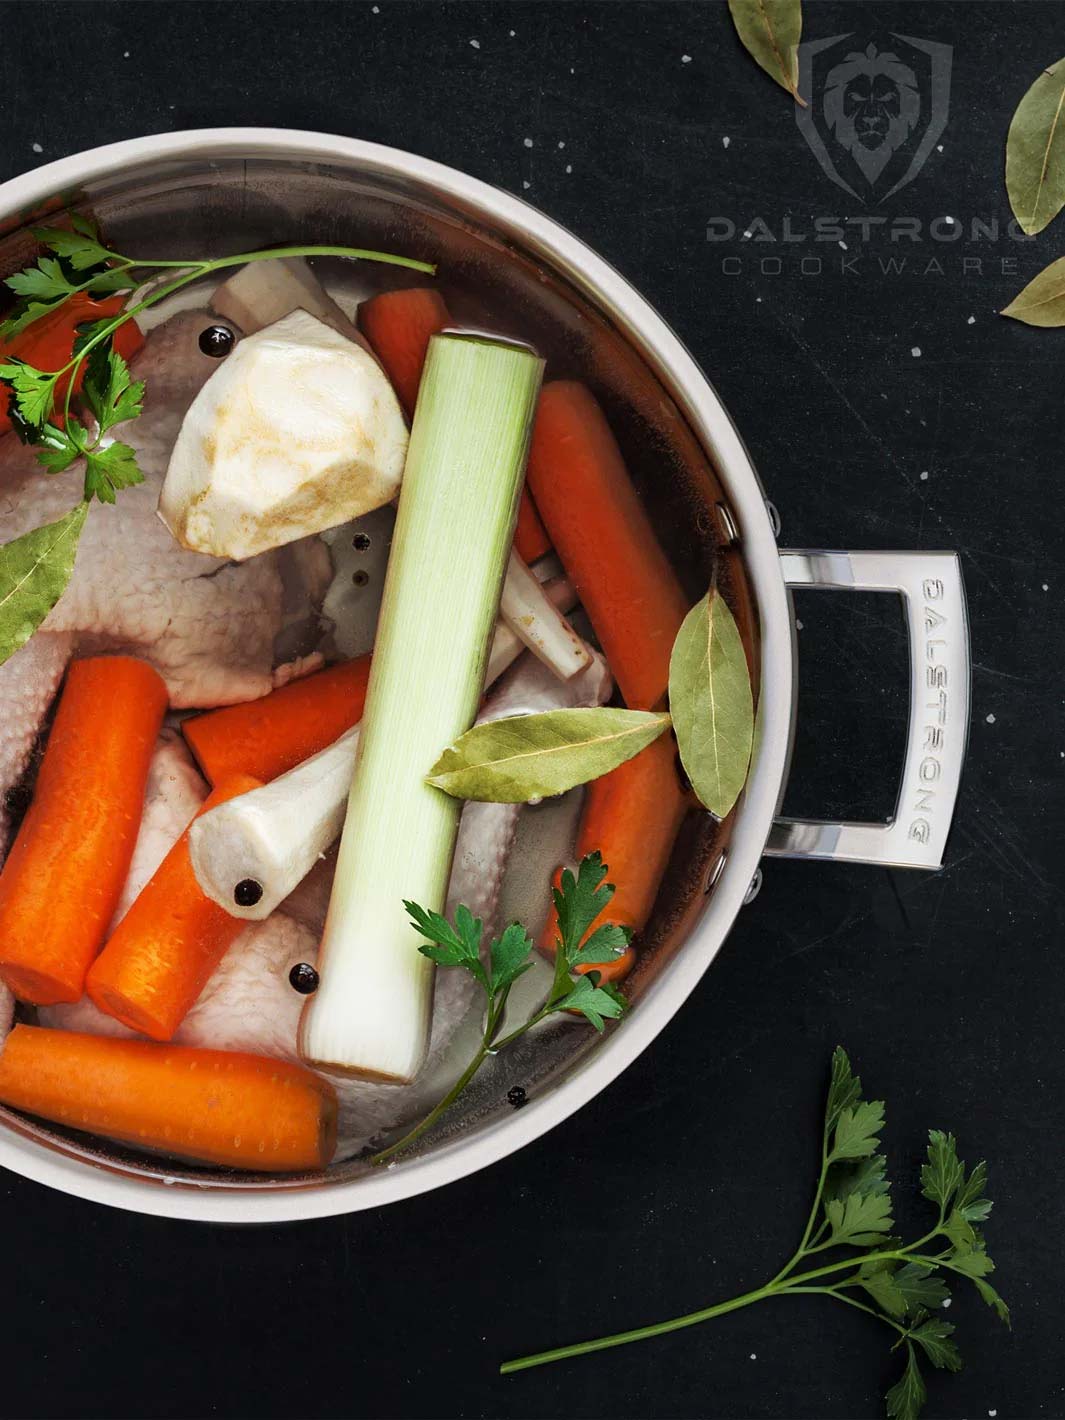 Stock Pots: Find out why your kitchen needs one – Dalstrong